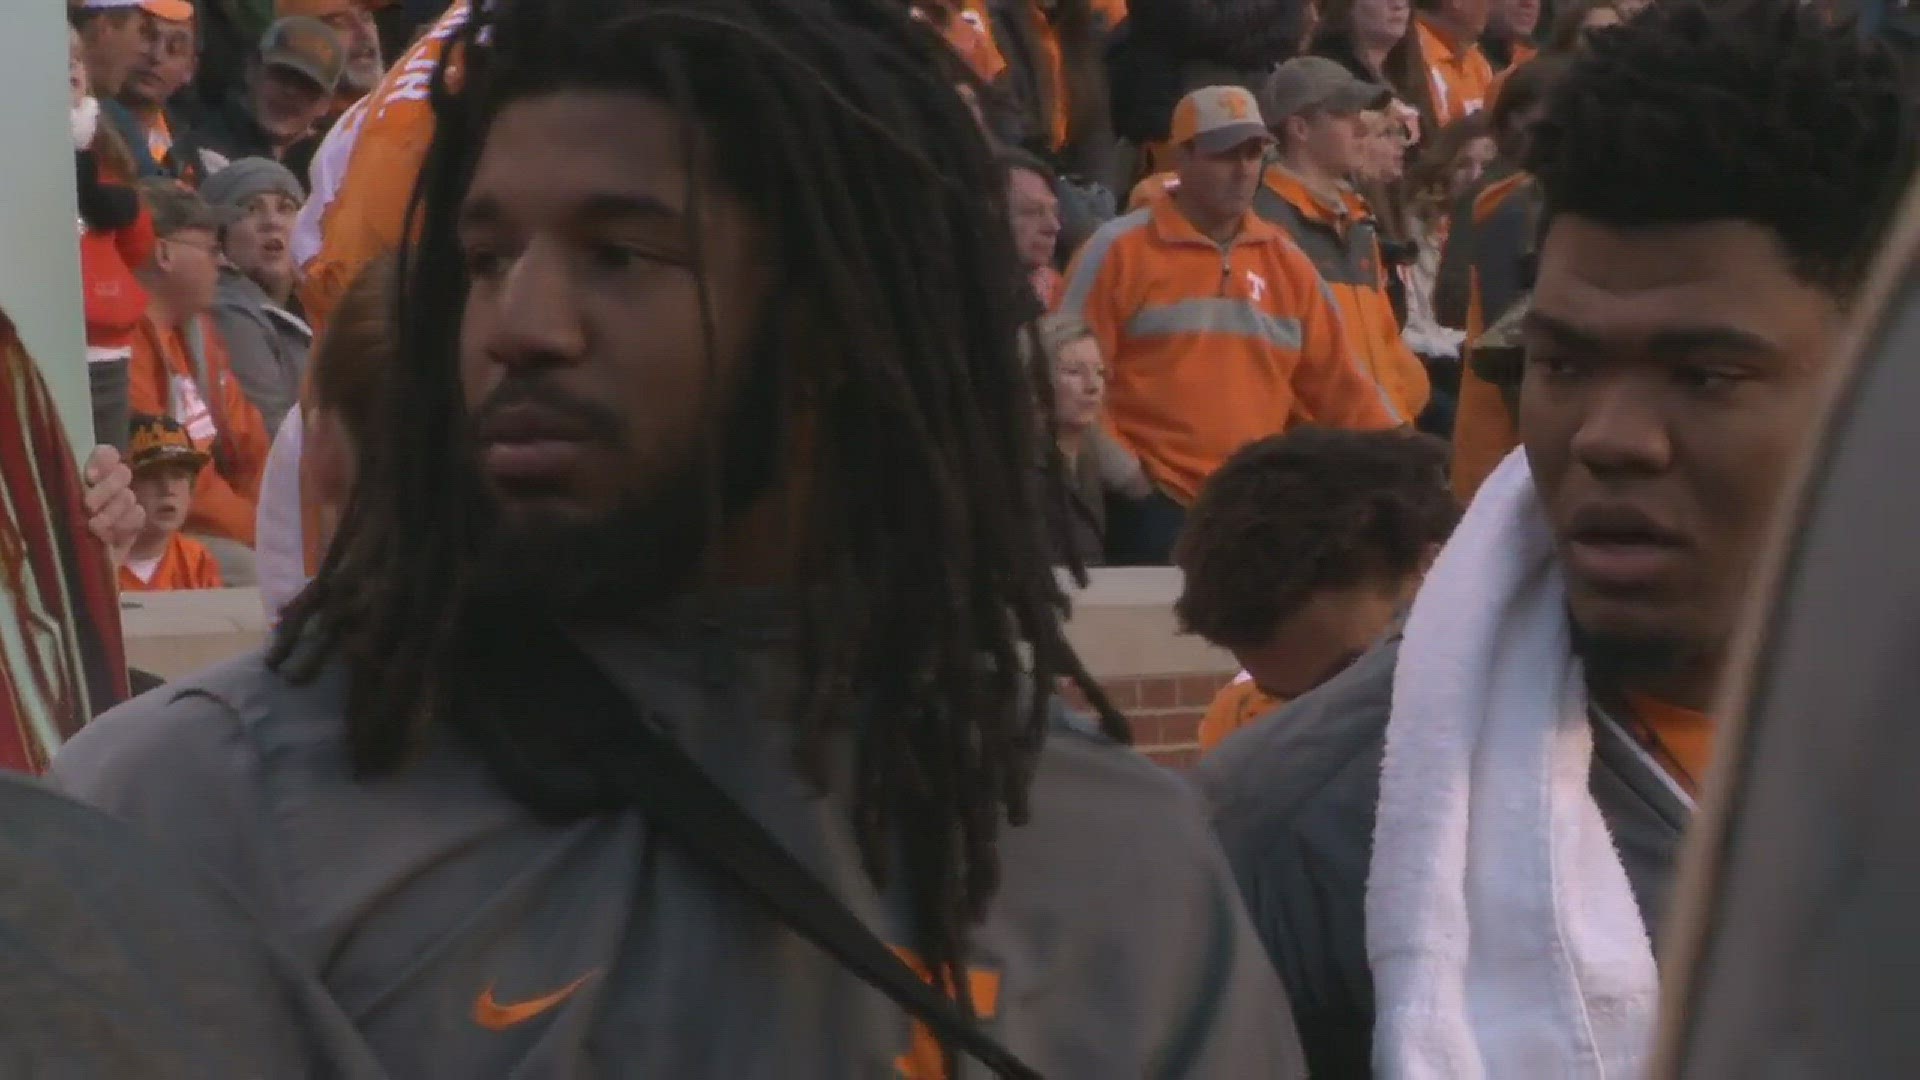 Apparently, Jalen had not seen Aaron Medley warm up on the sidelines. His reaction face is priceless.